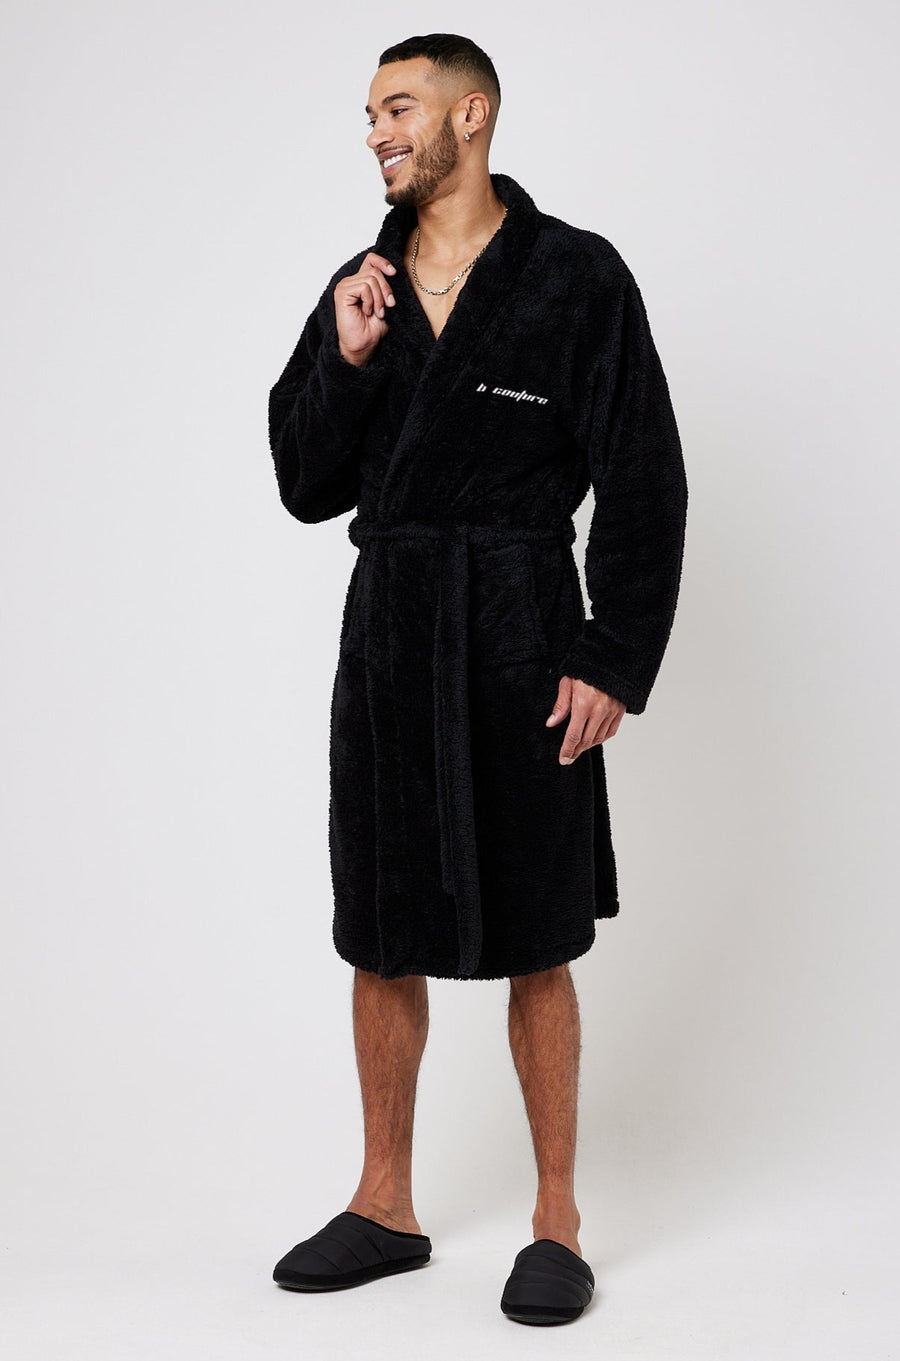 B Couture Dressing Gown - Black